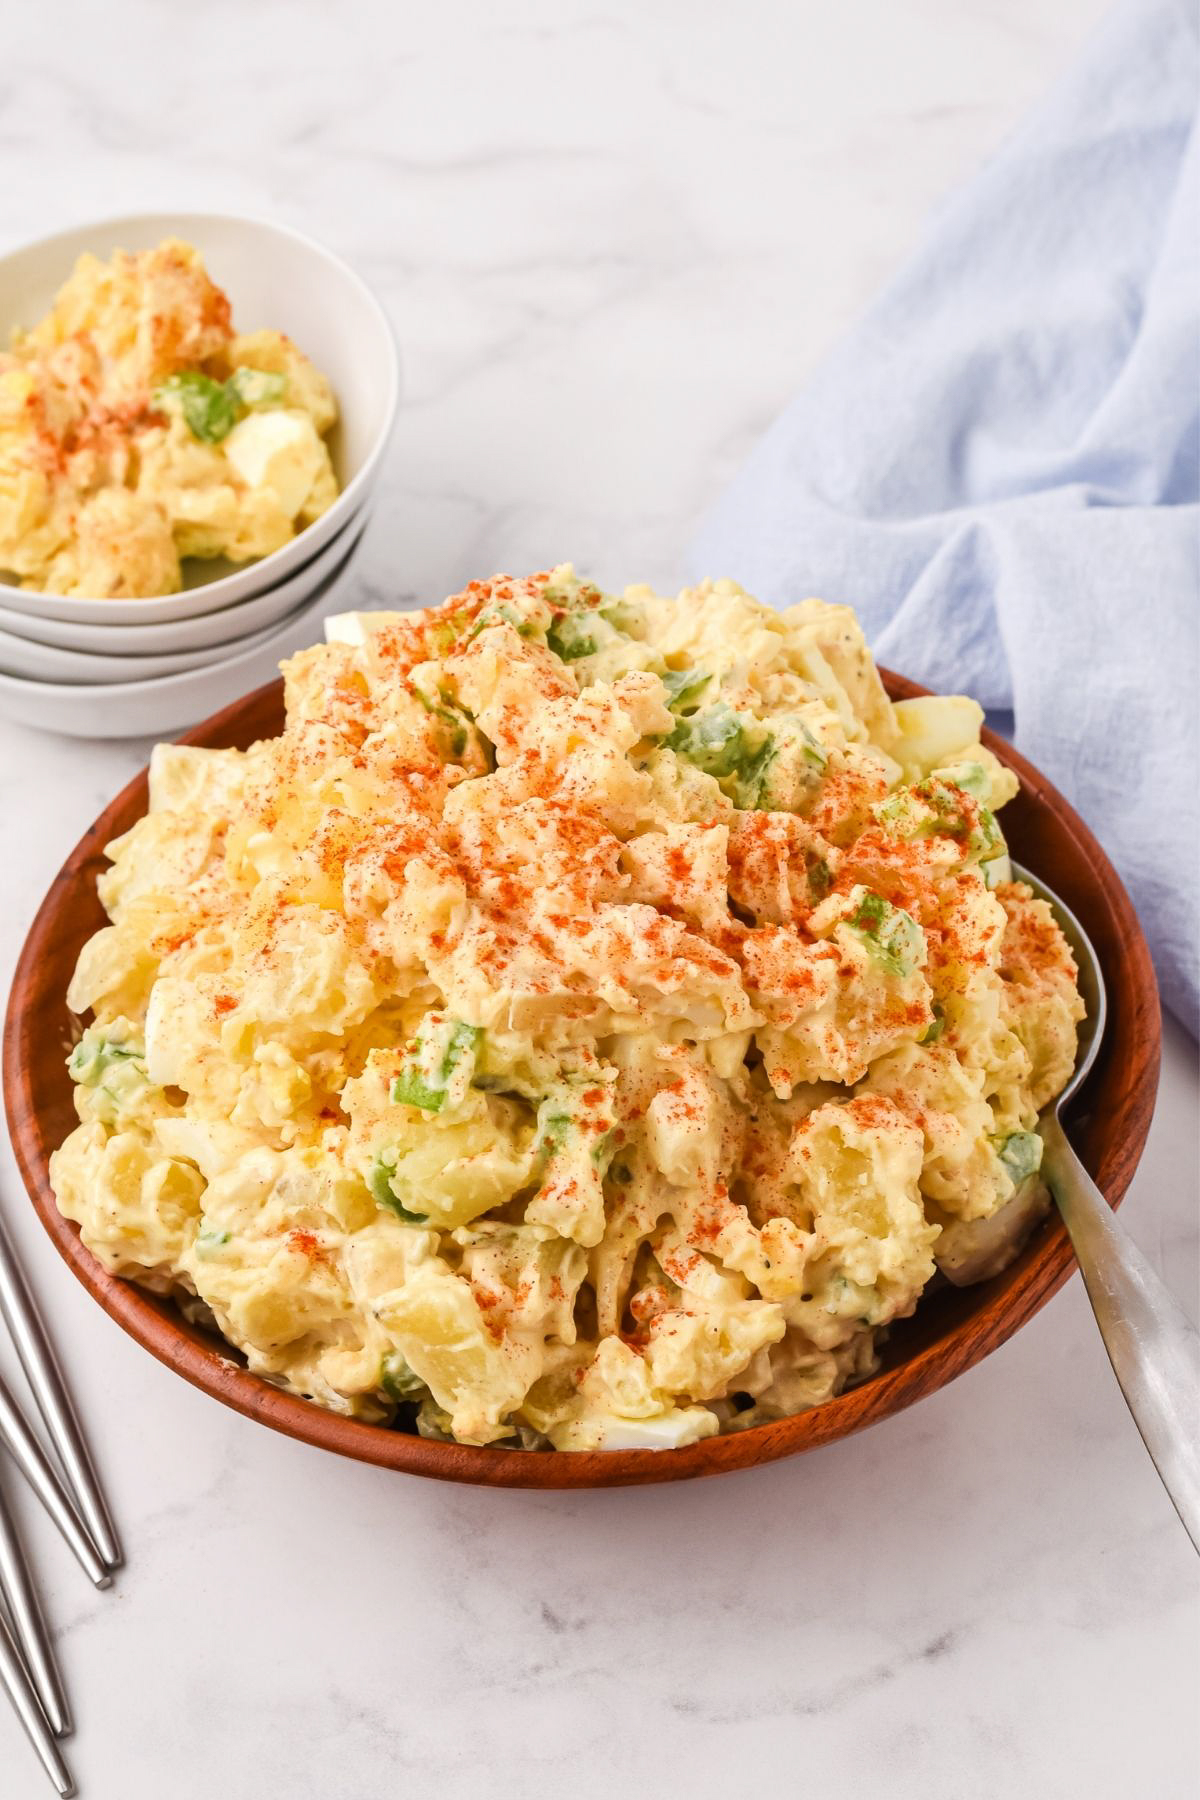 heaping pile of potato salad with paprika in wooden serving bowl